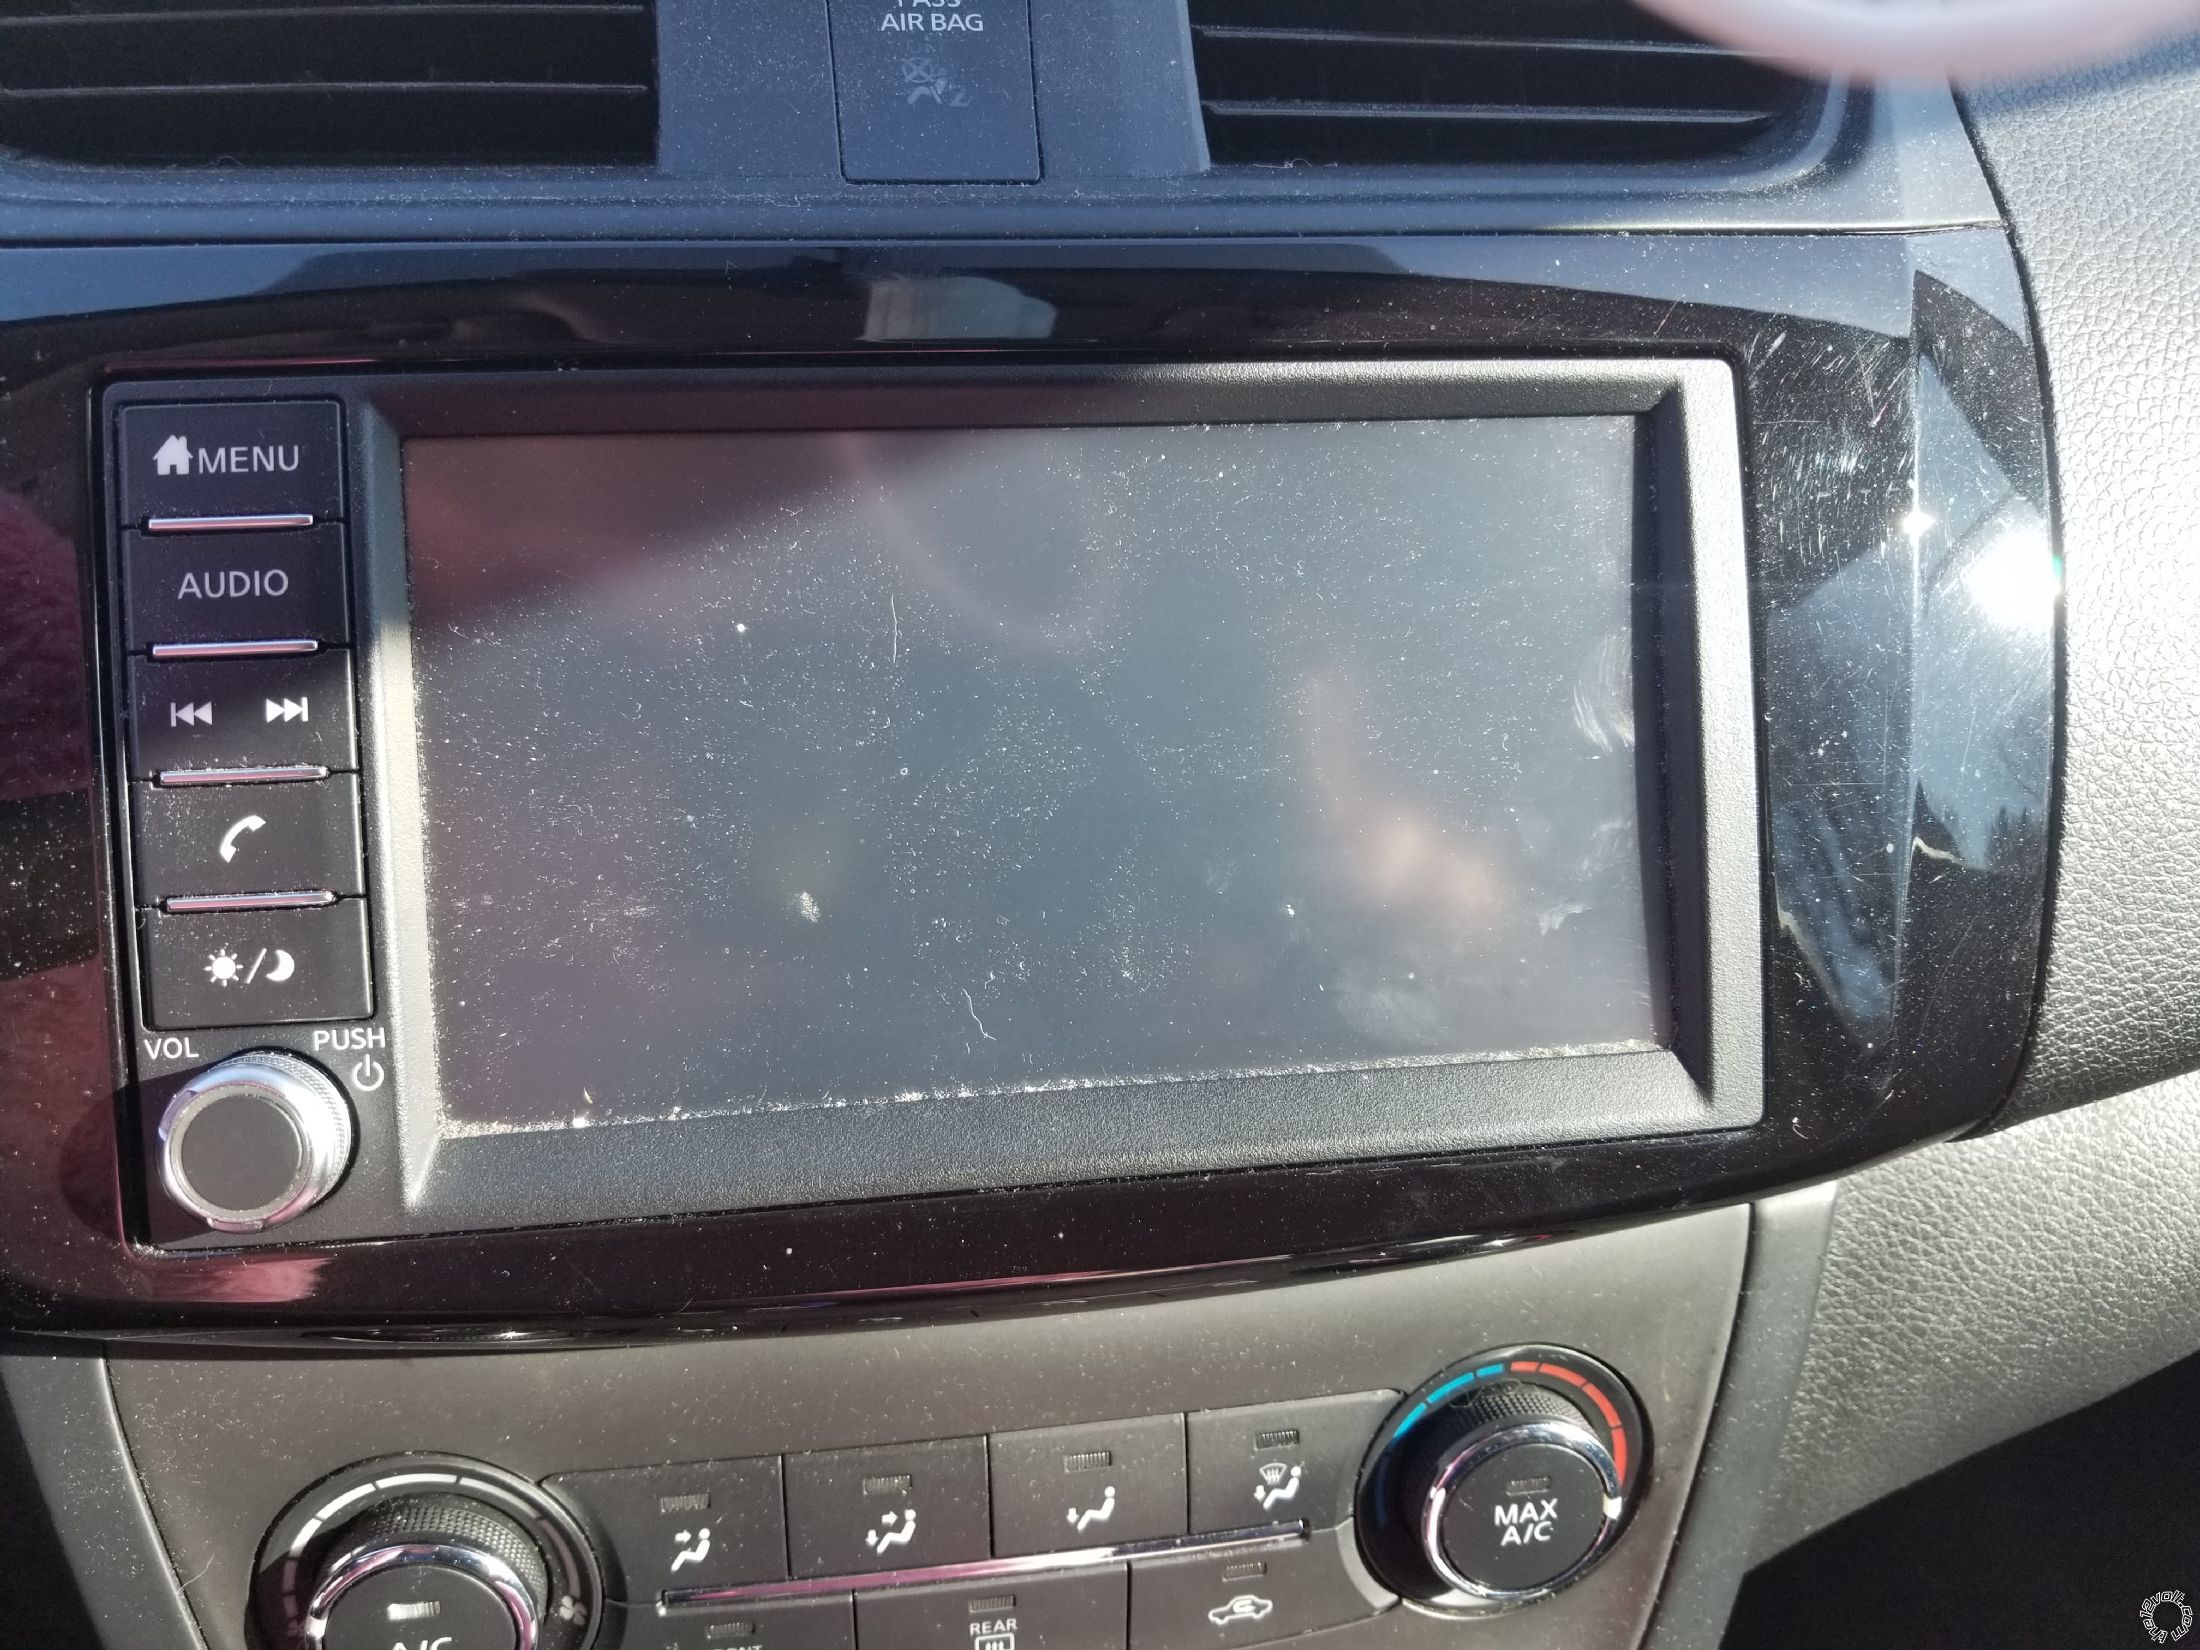 CD Radio For 2019 Nissan Sentra -- posted image.